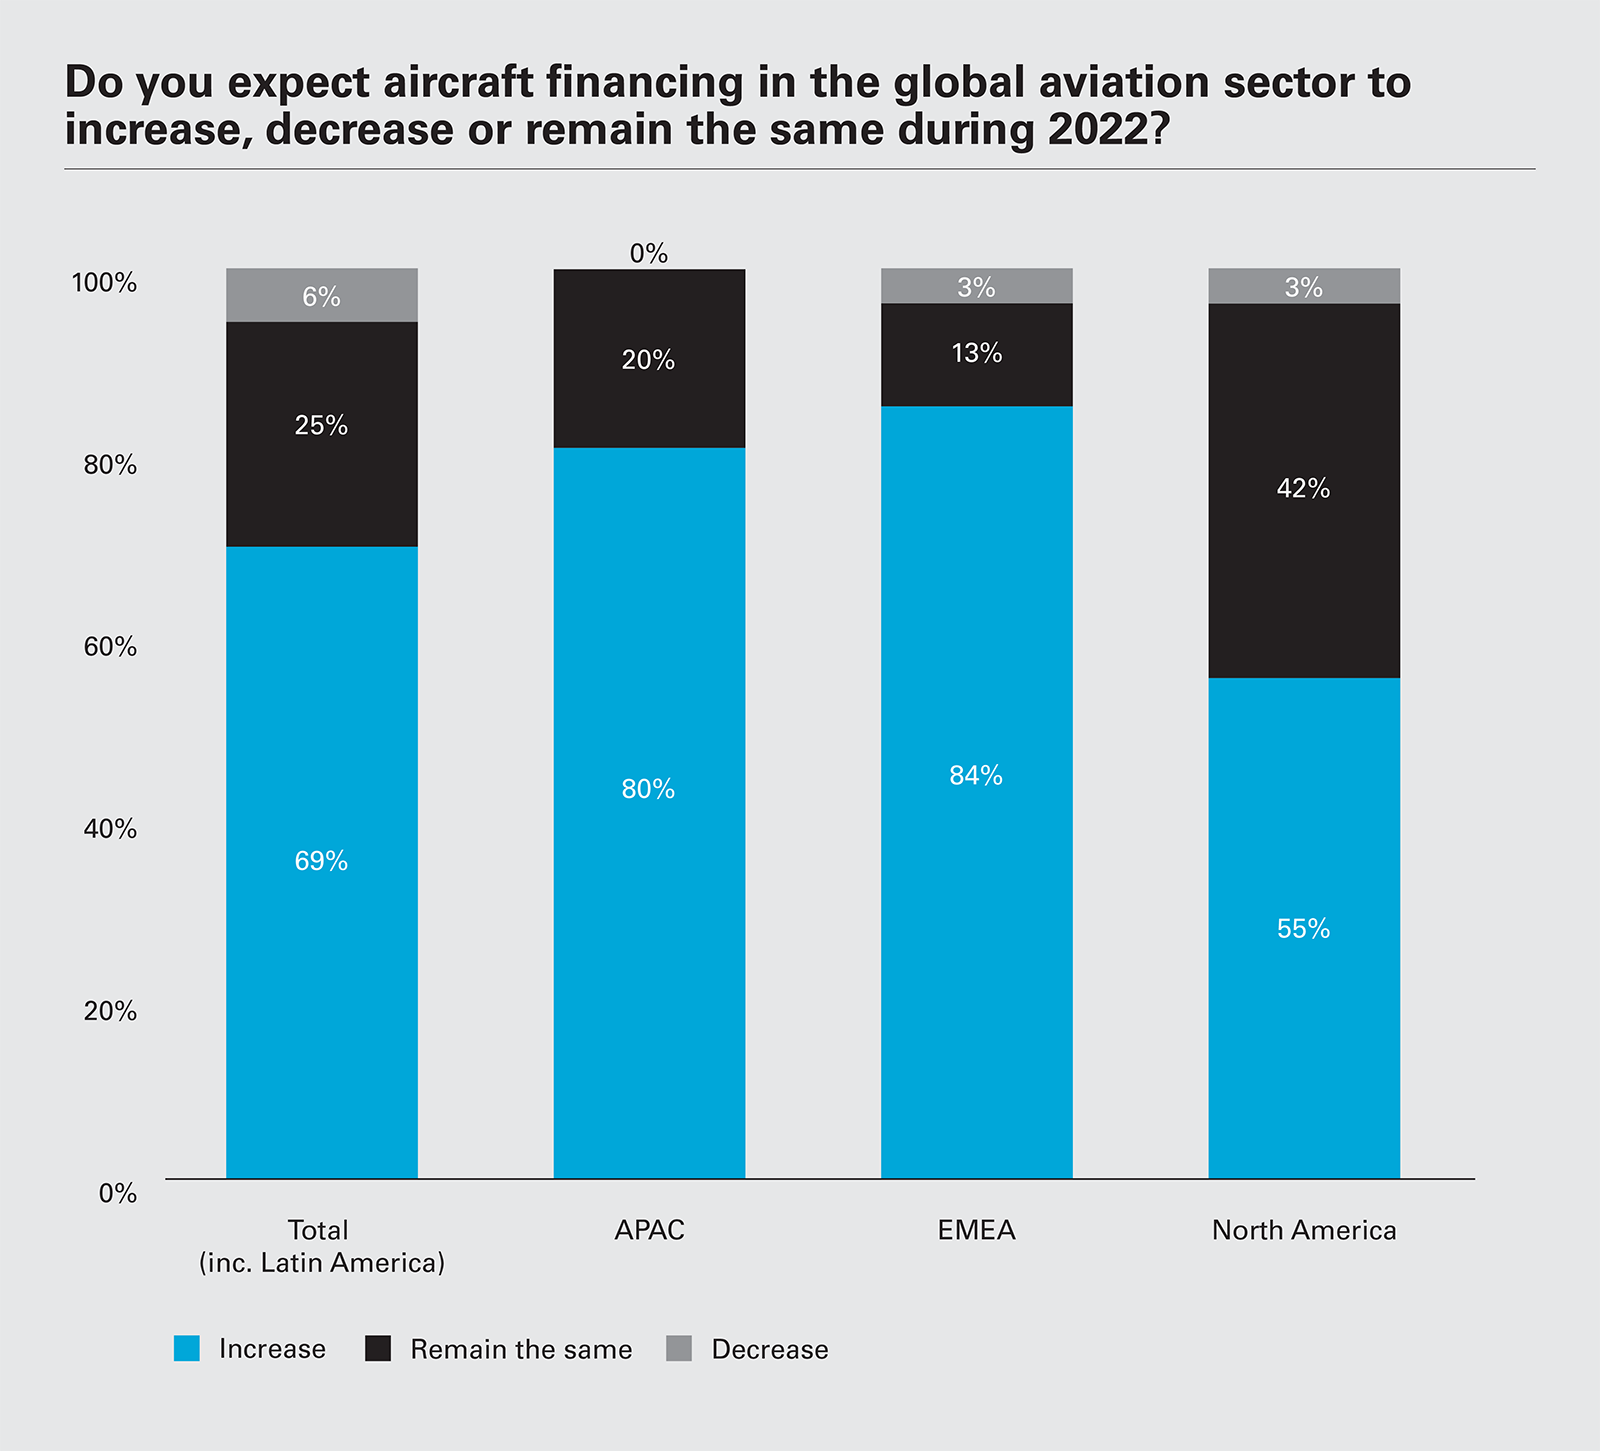 Do you expect aircraft financing in the global aviation sector to increase, decrease or remain the same during 2022?